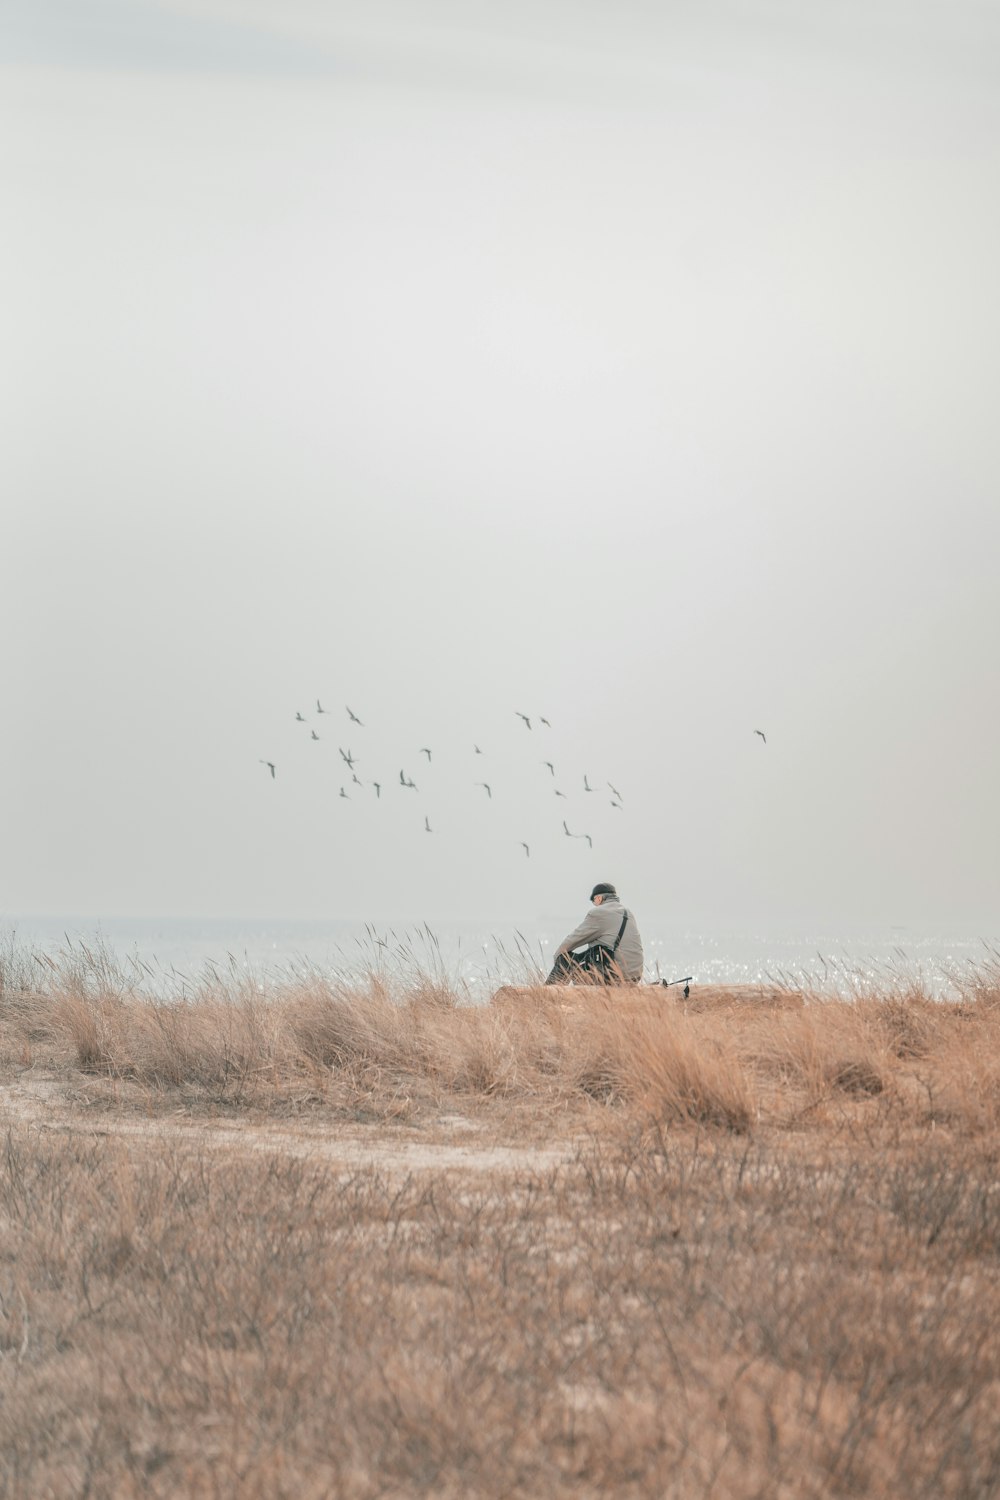 a person sitting in a field with birds flying around